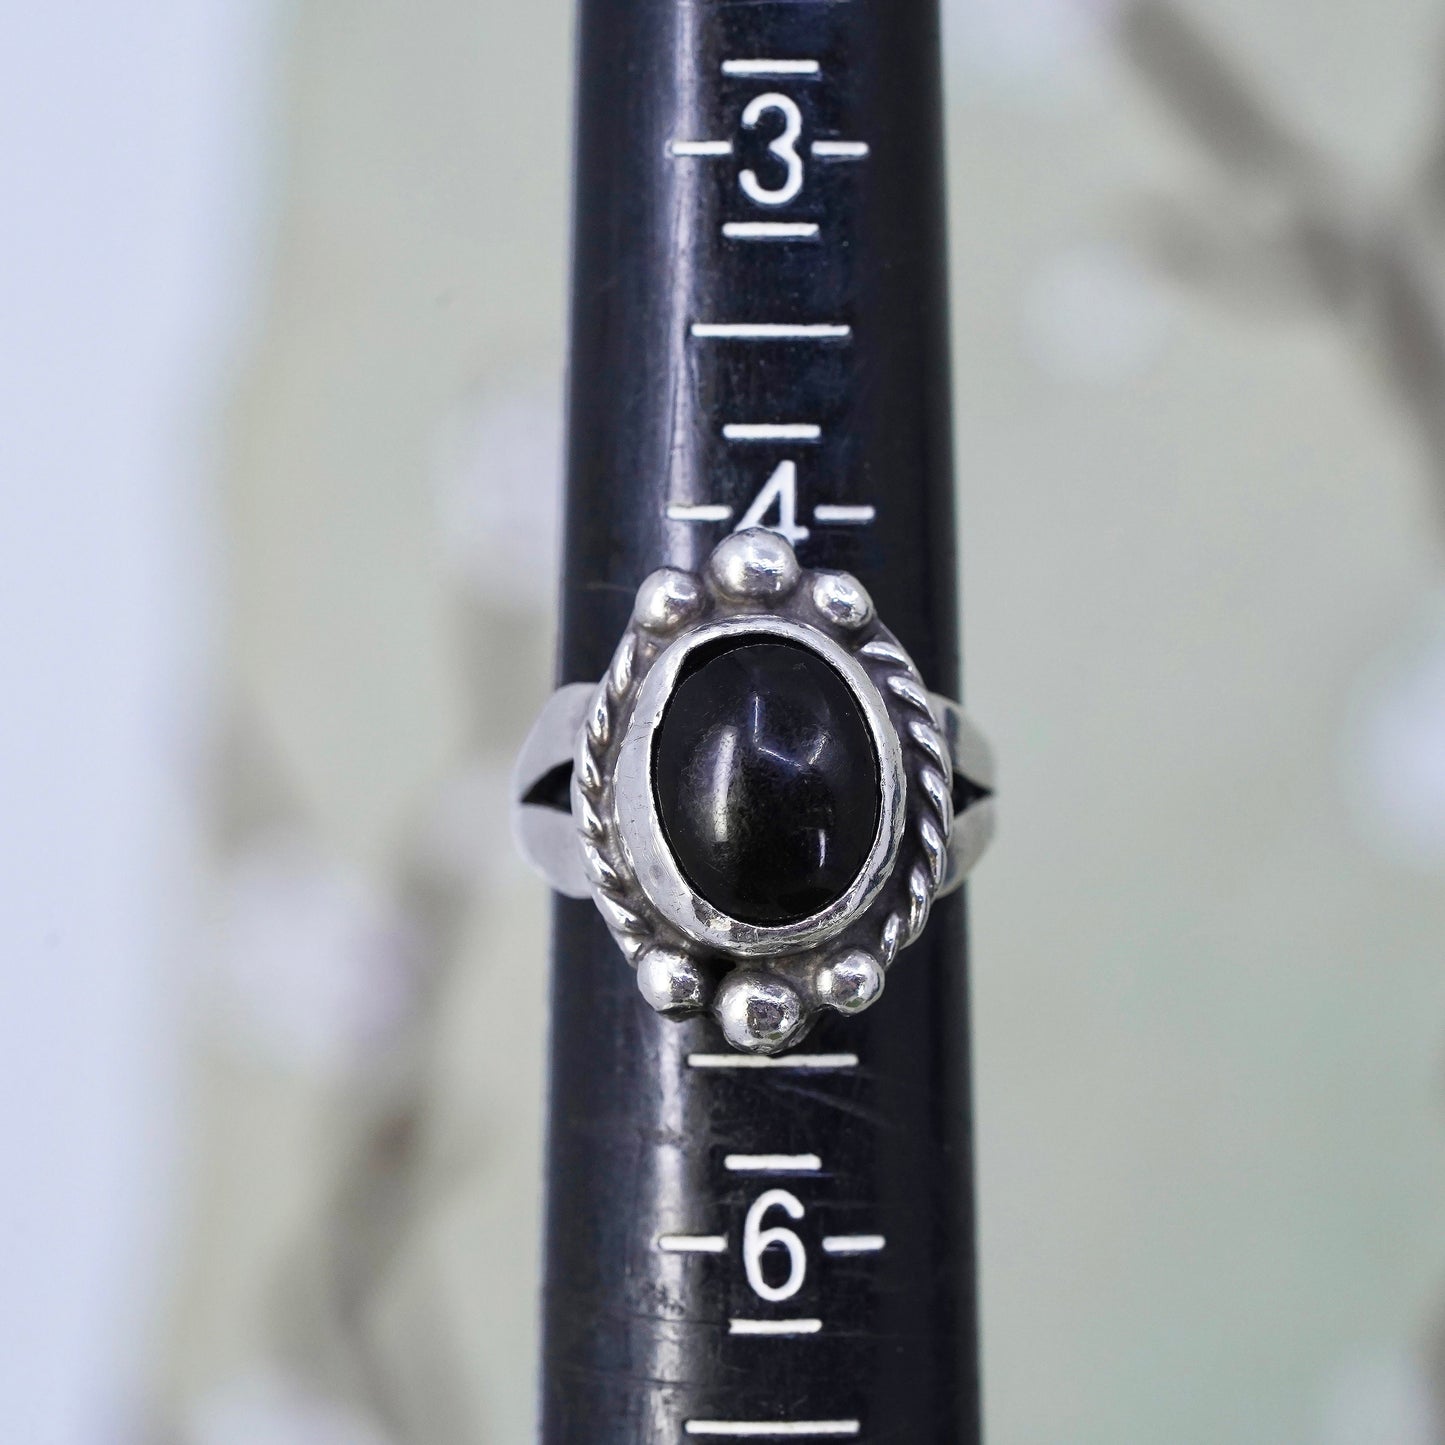 Size 4.5, Vintage sterling 925 silver handmade ring with onyx and bead details